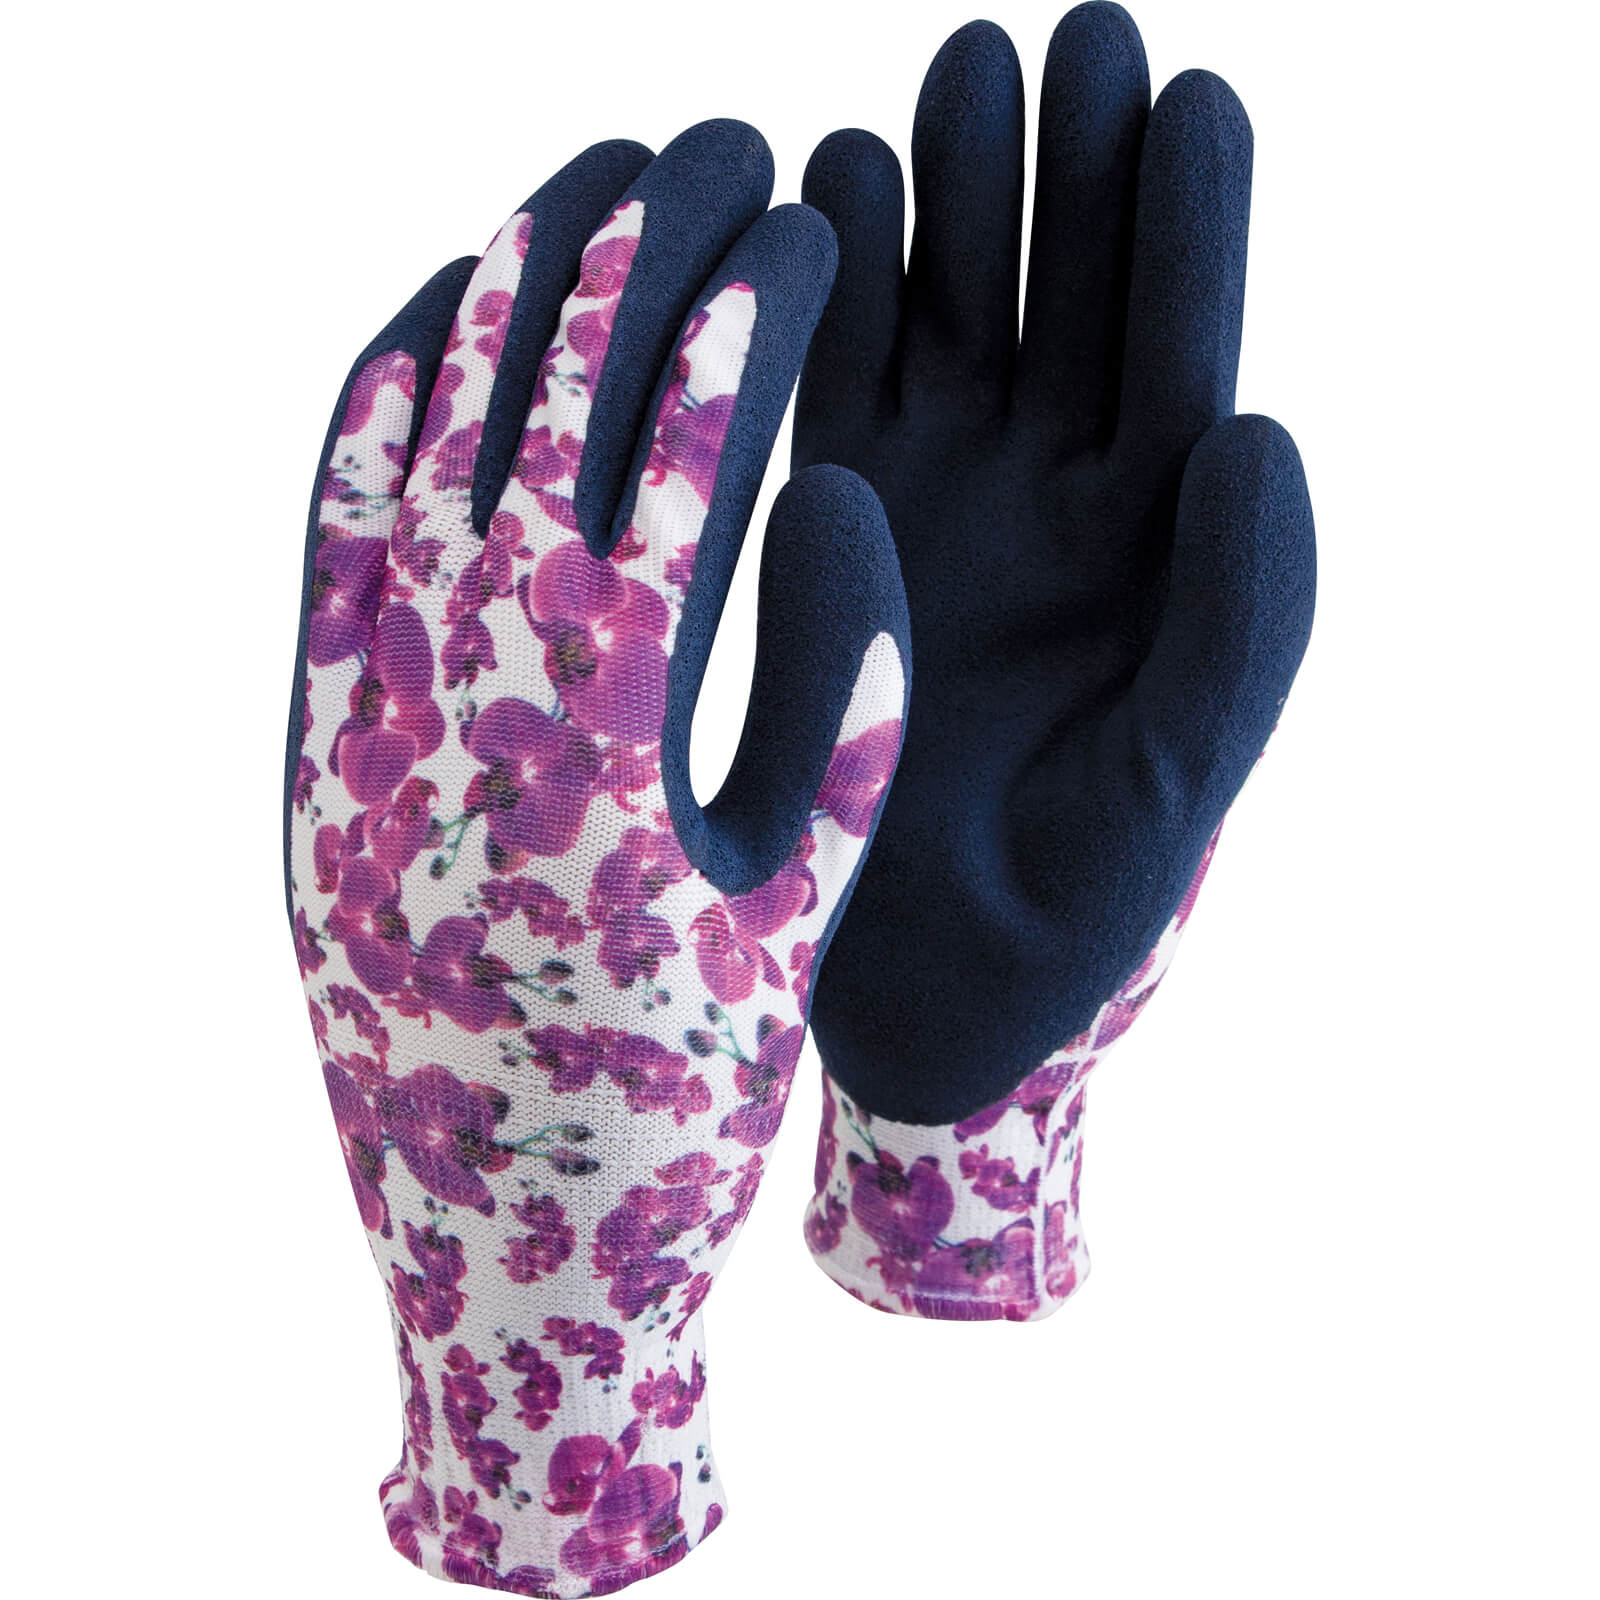 Image of Town and Country Mastergrip Patterns Garden Gloves Cherry Blossom S